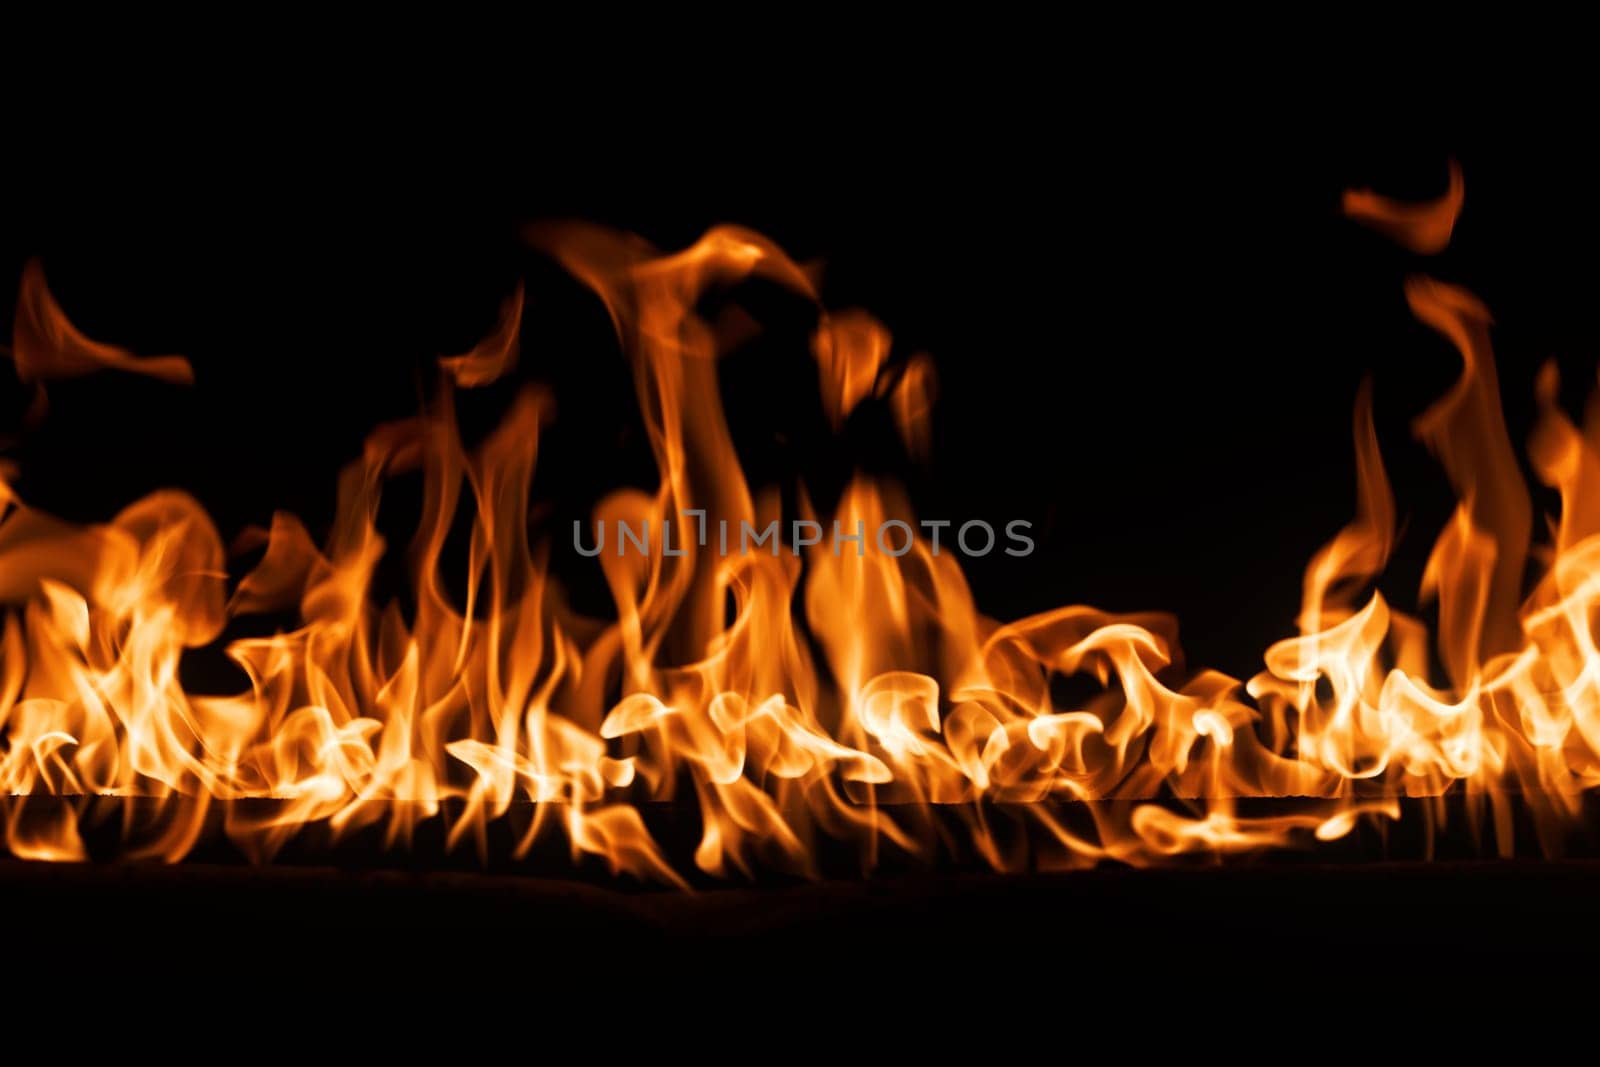 firestorm. Fire burning. Bright burning flames on a black background. Wall of Real fire, abstract background. Fire flames, isolated on dark background by EvgeniyQW